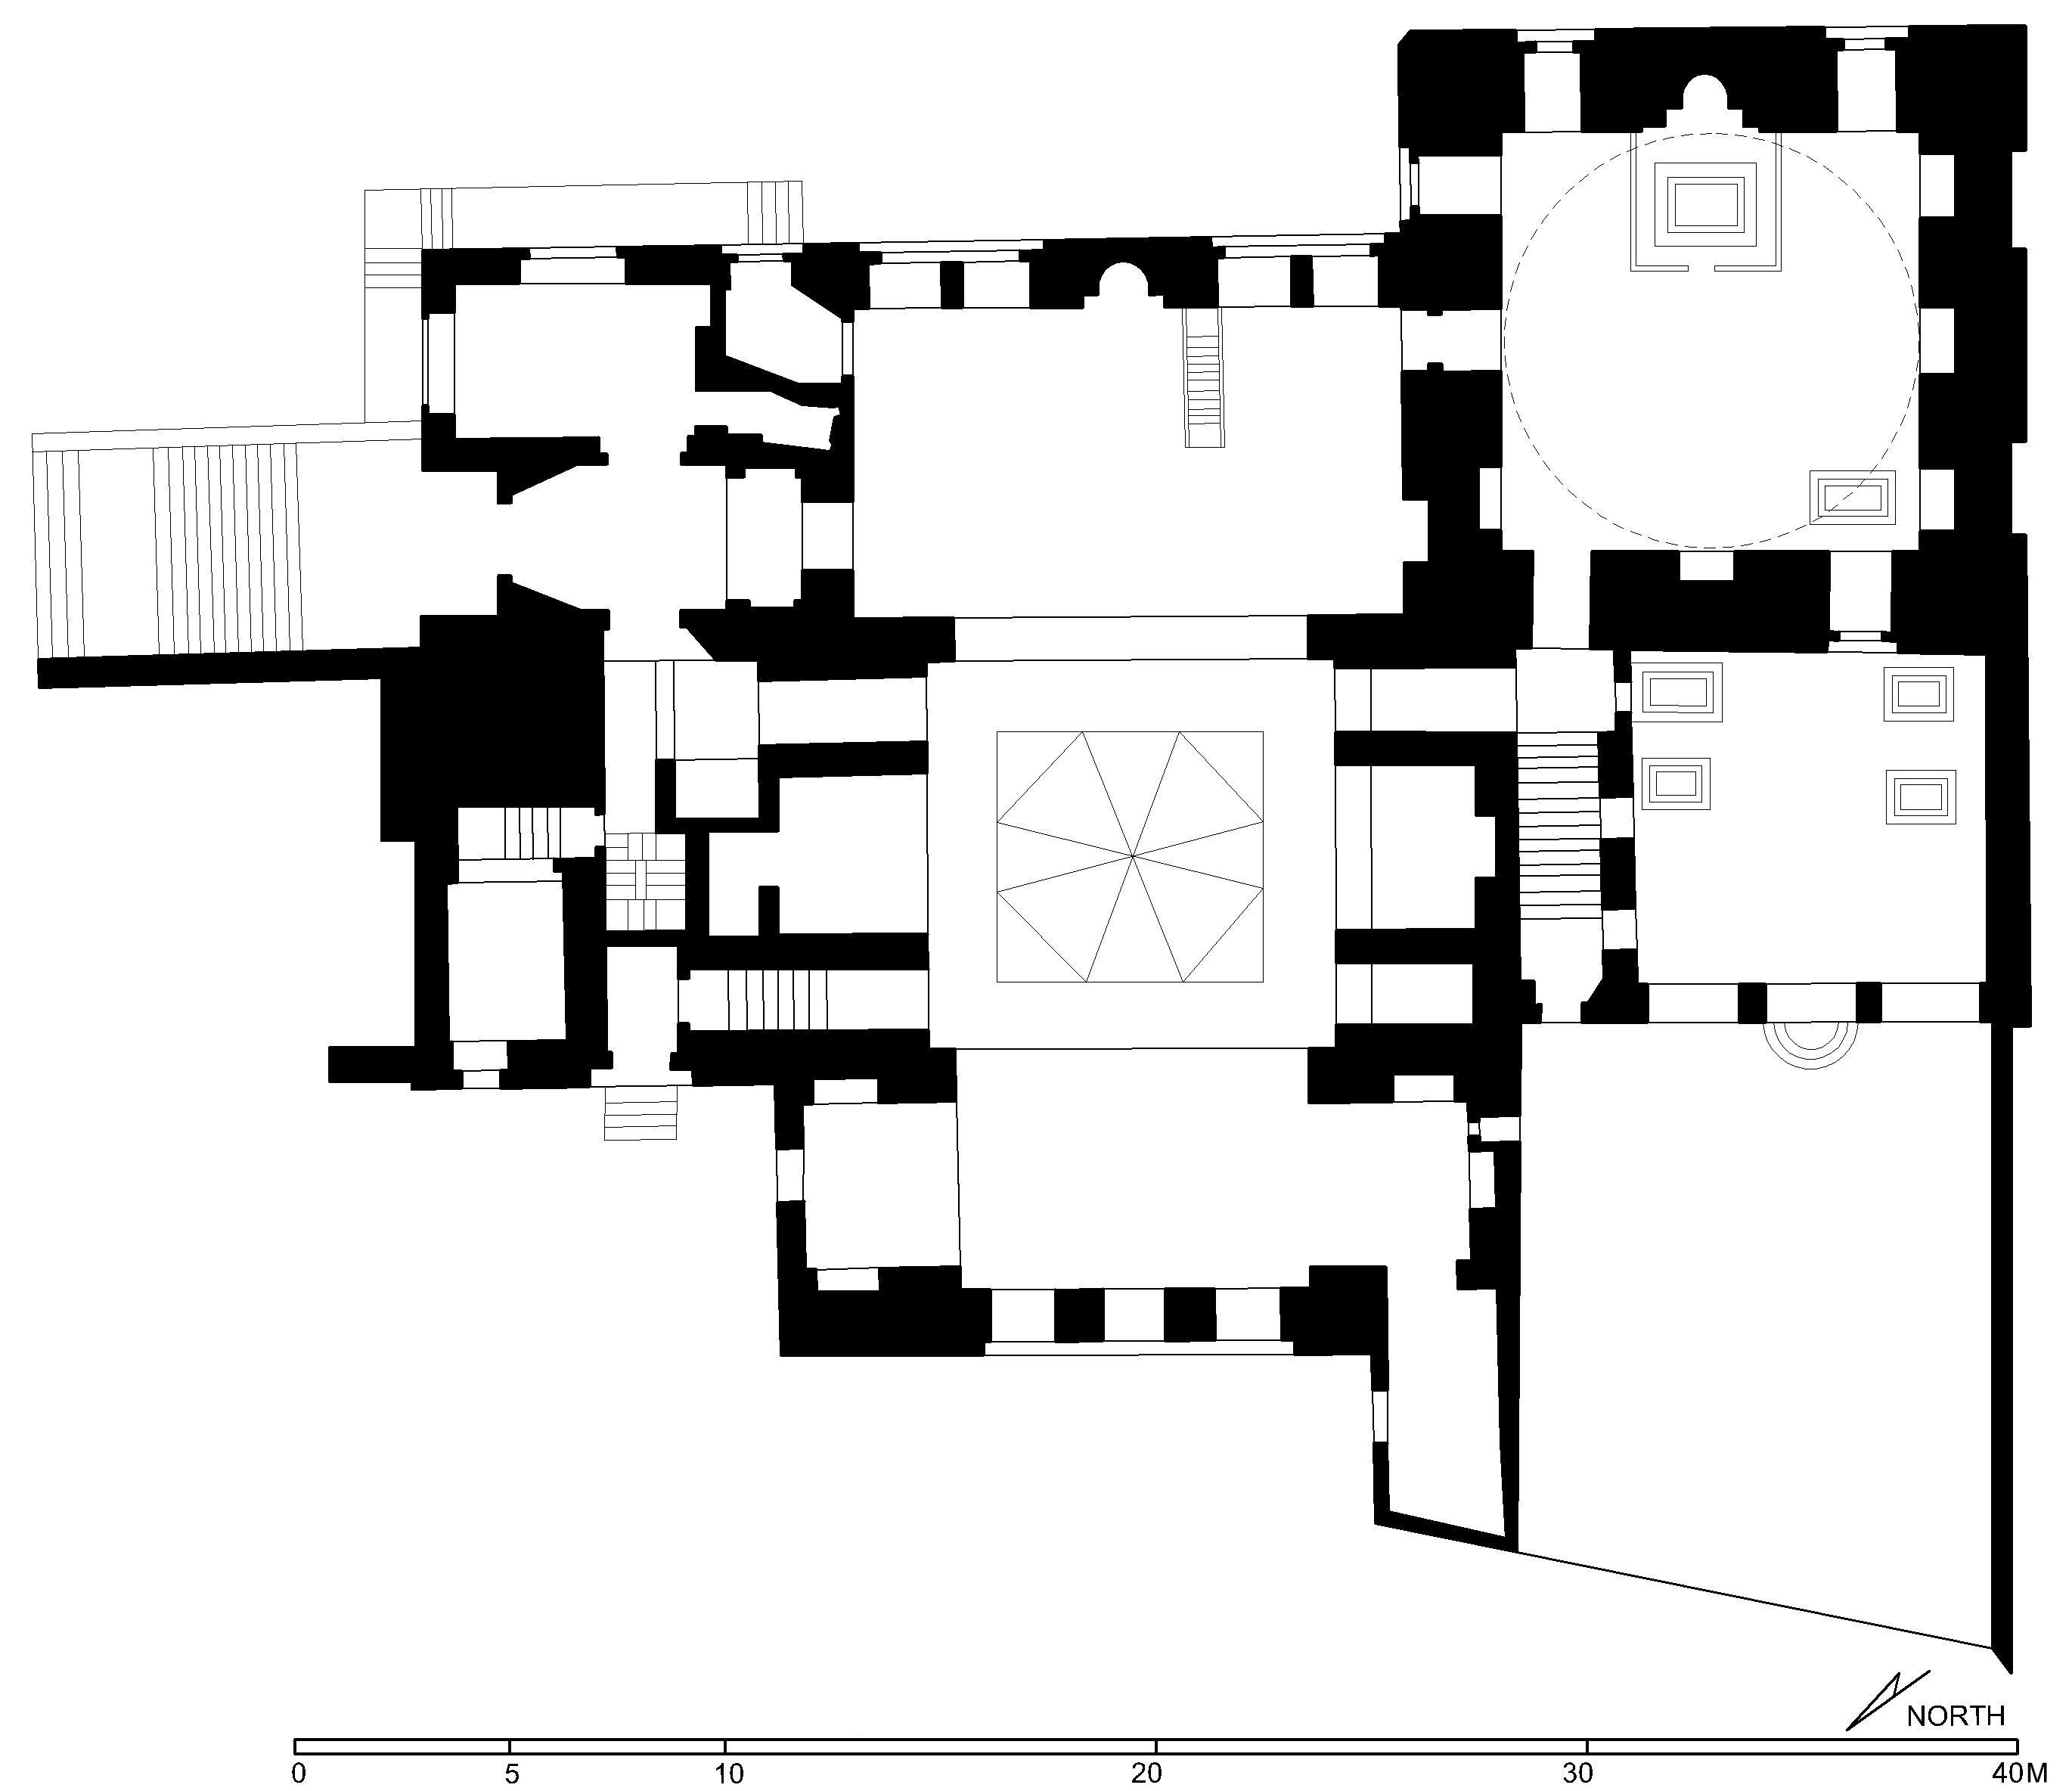 Floor plan of Sultan Qaytbay Funerary Complex at the Northern Cemetery, Cairo